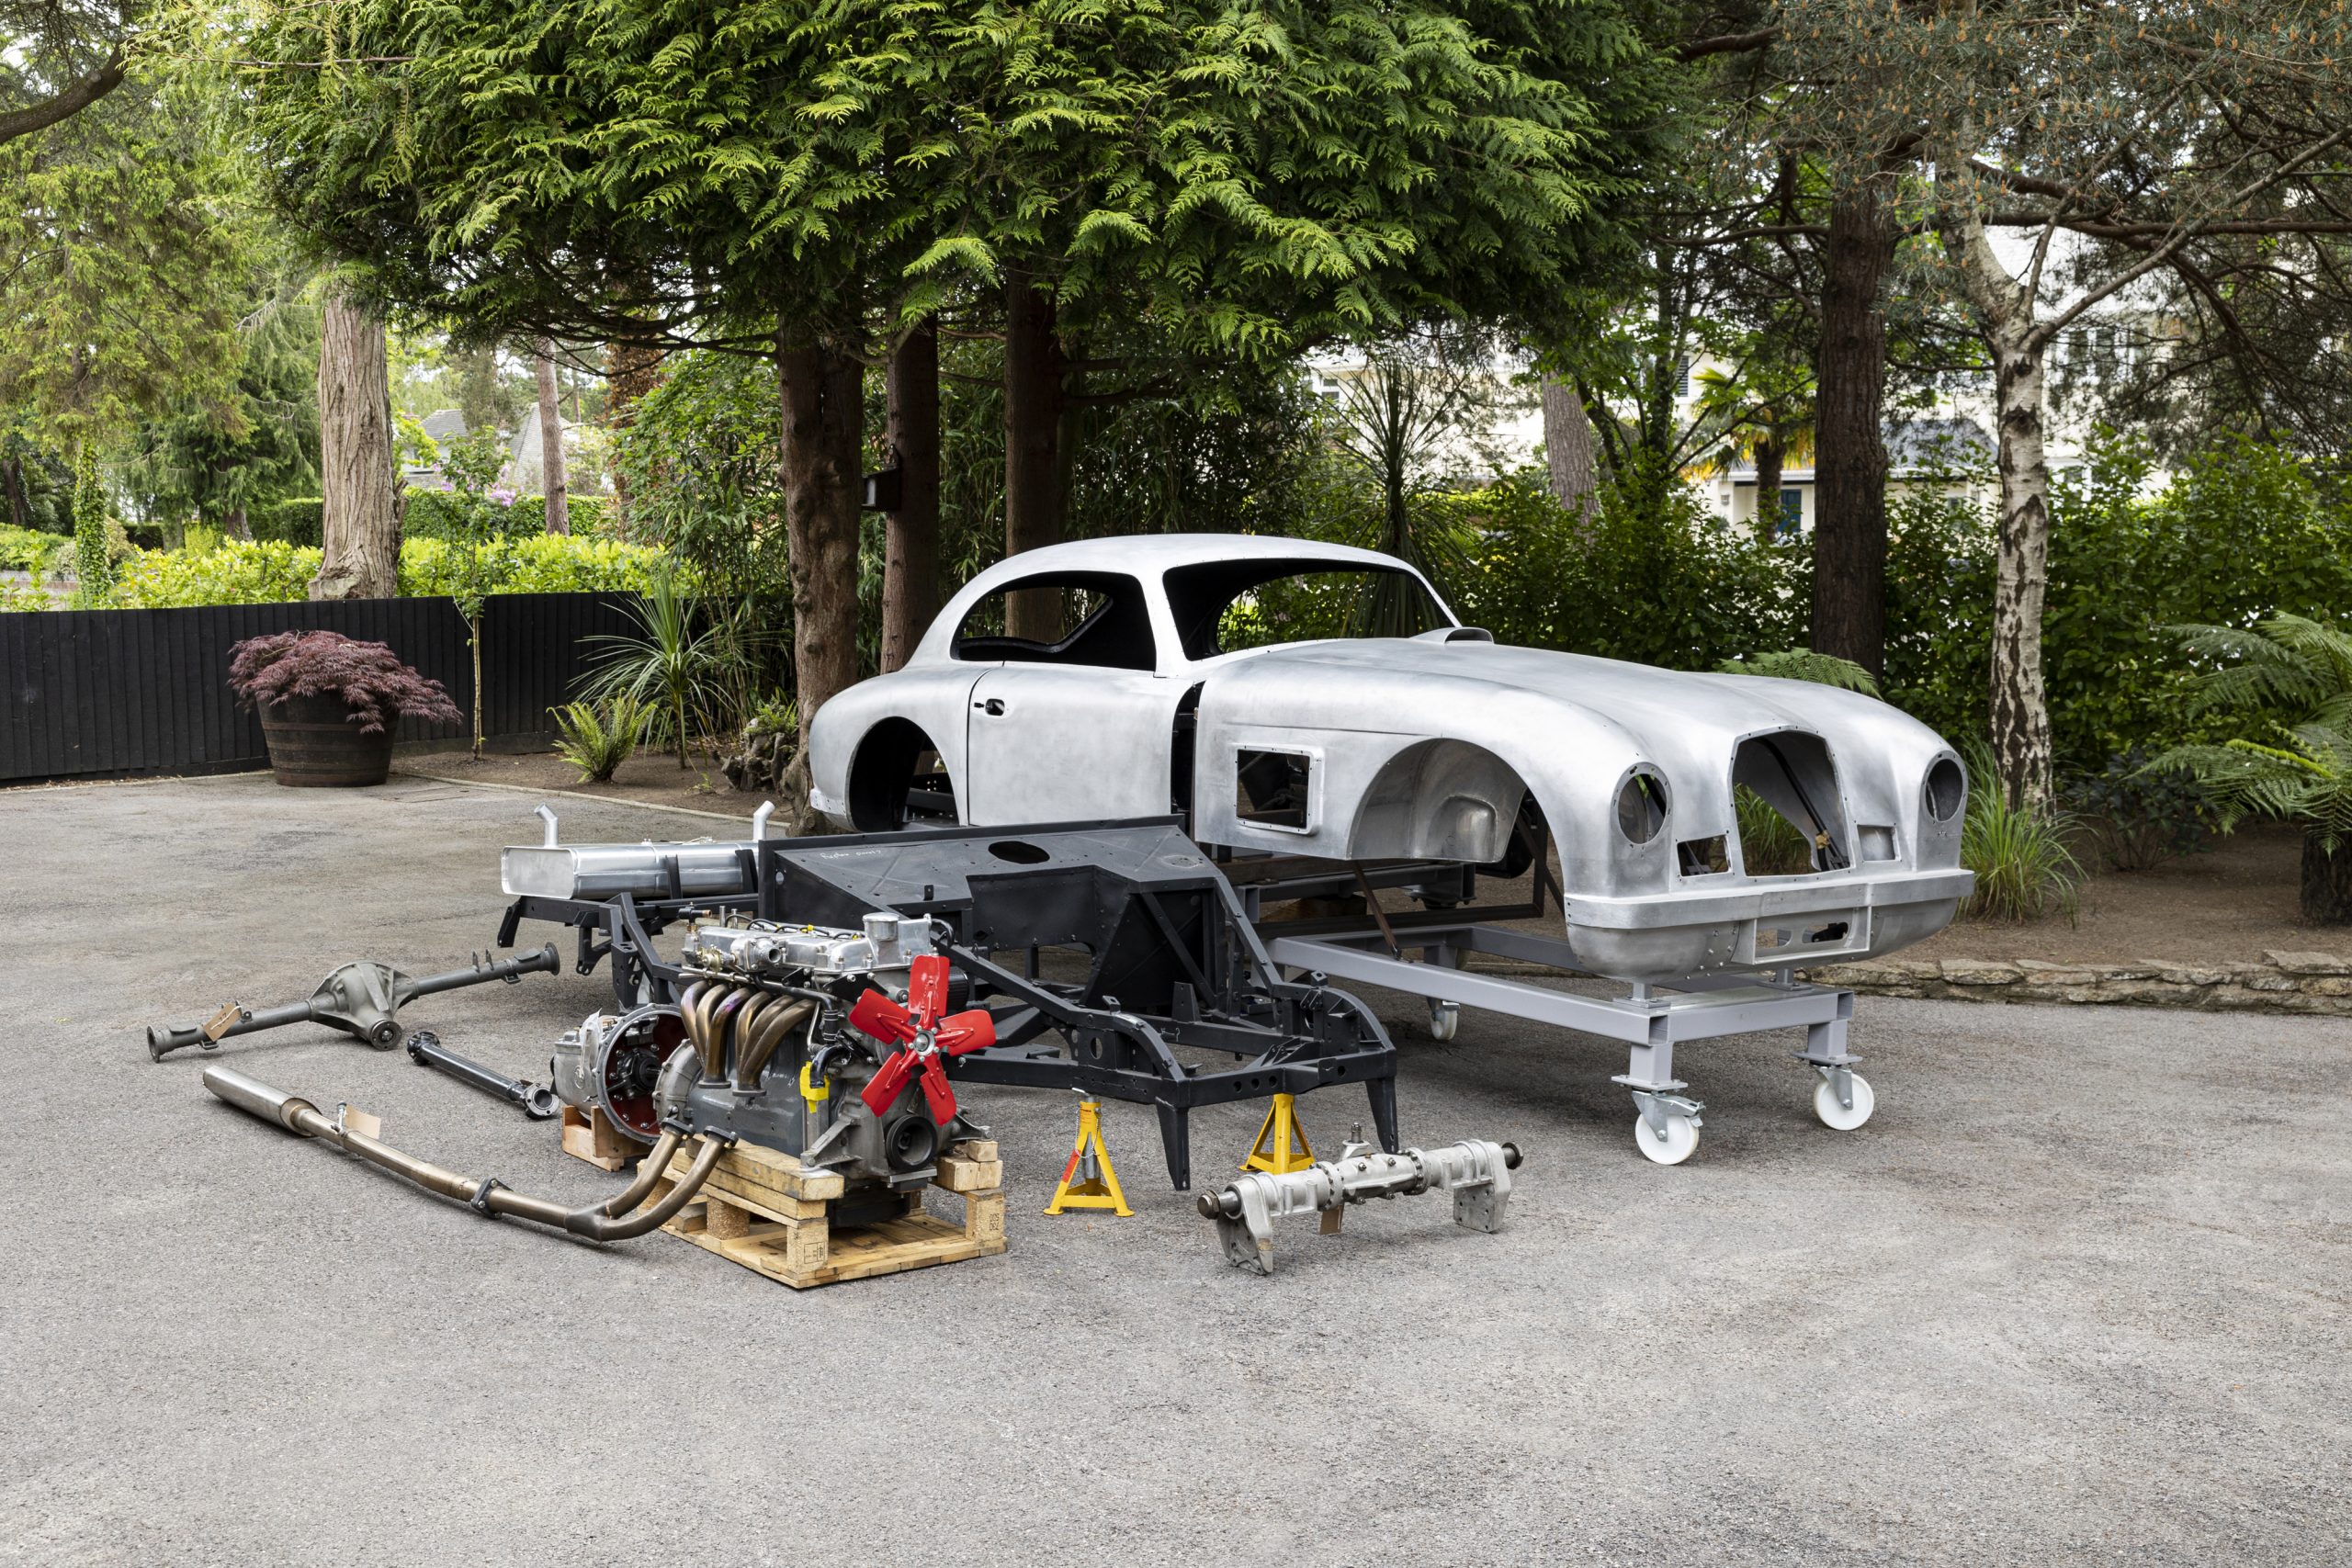 Build-it-yourself: The first Aston Martin DB2 could be yours – for £250,000